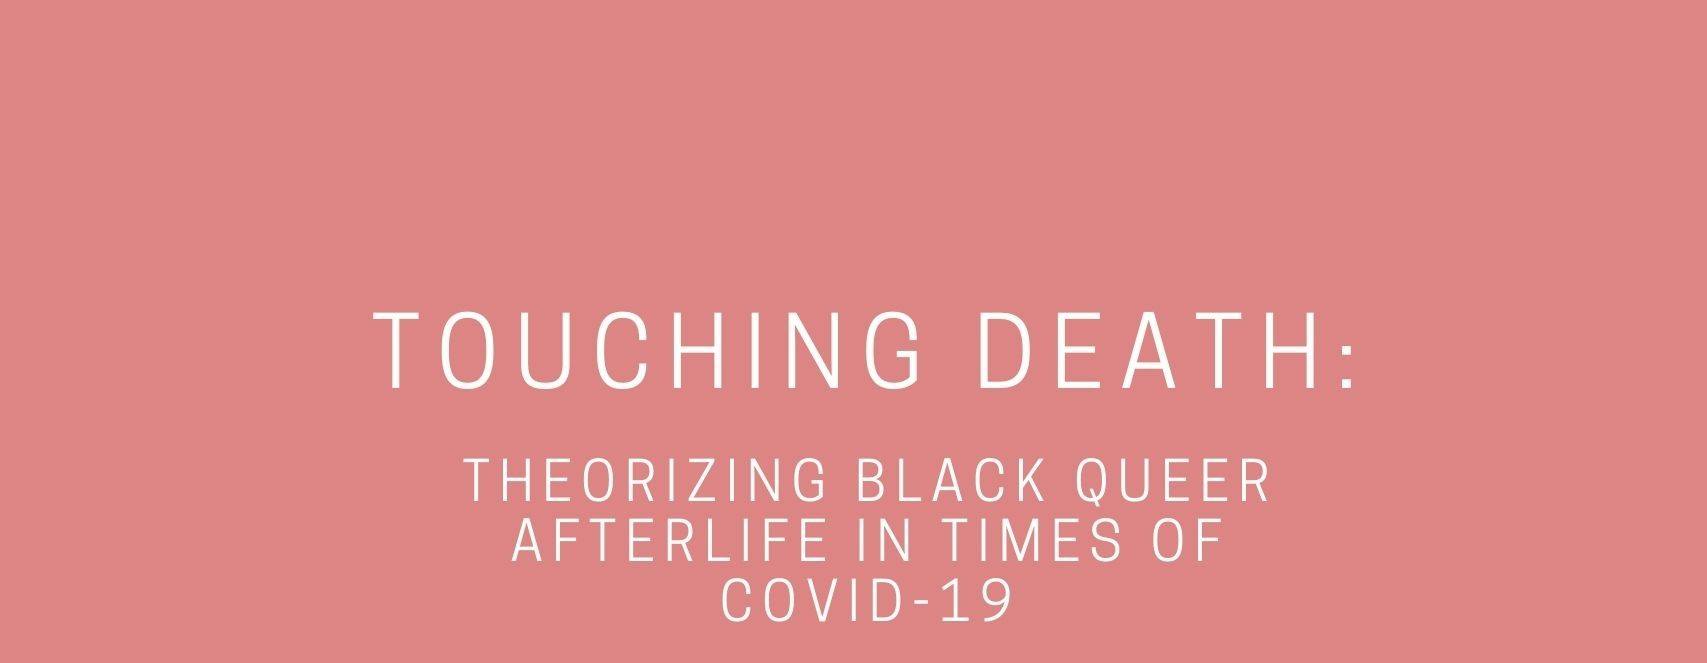 Sex Salon: Touching Death: Theorizing Black Queer Afterlife in Times of COVID-19